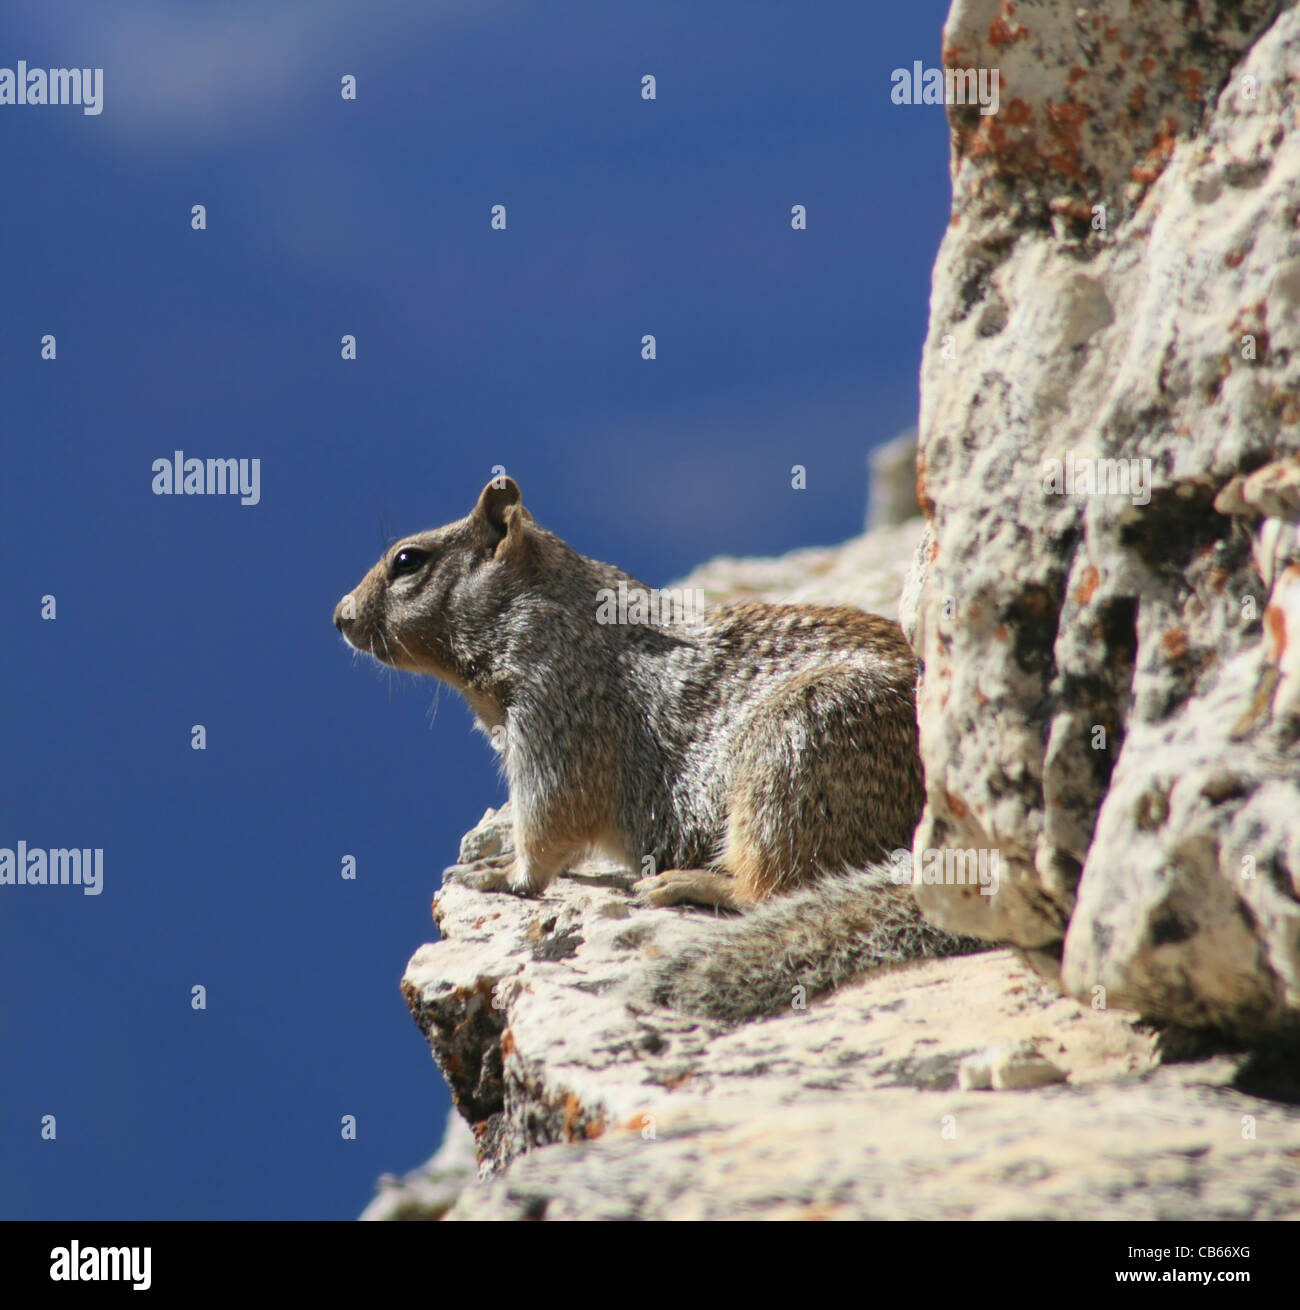 rock squirrel ( Spermophilus variegatus ) sitting on a ledge of the Grand Canyon Stock Photo